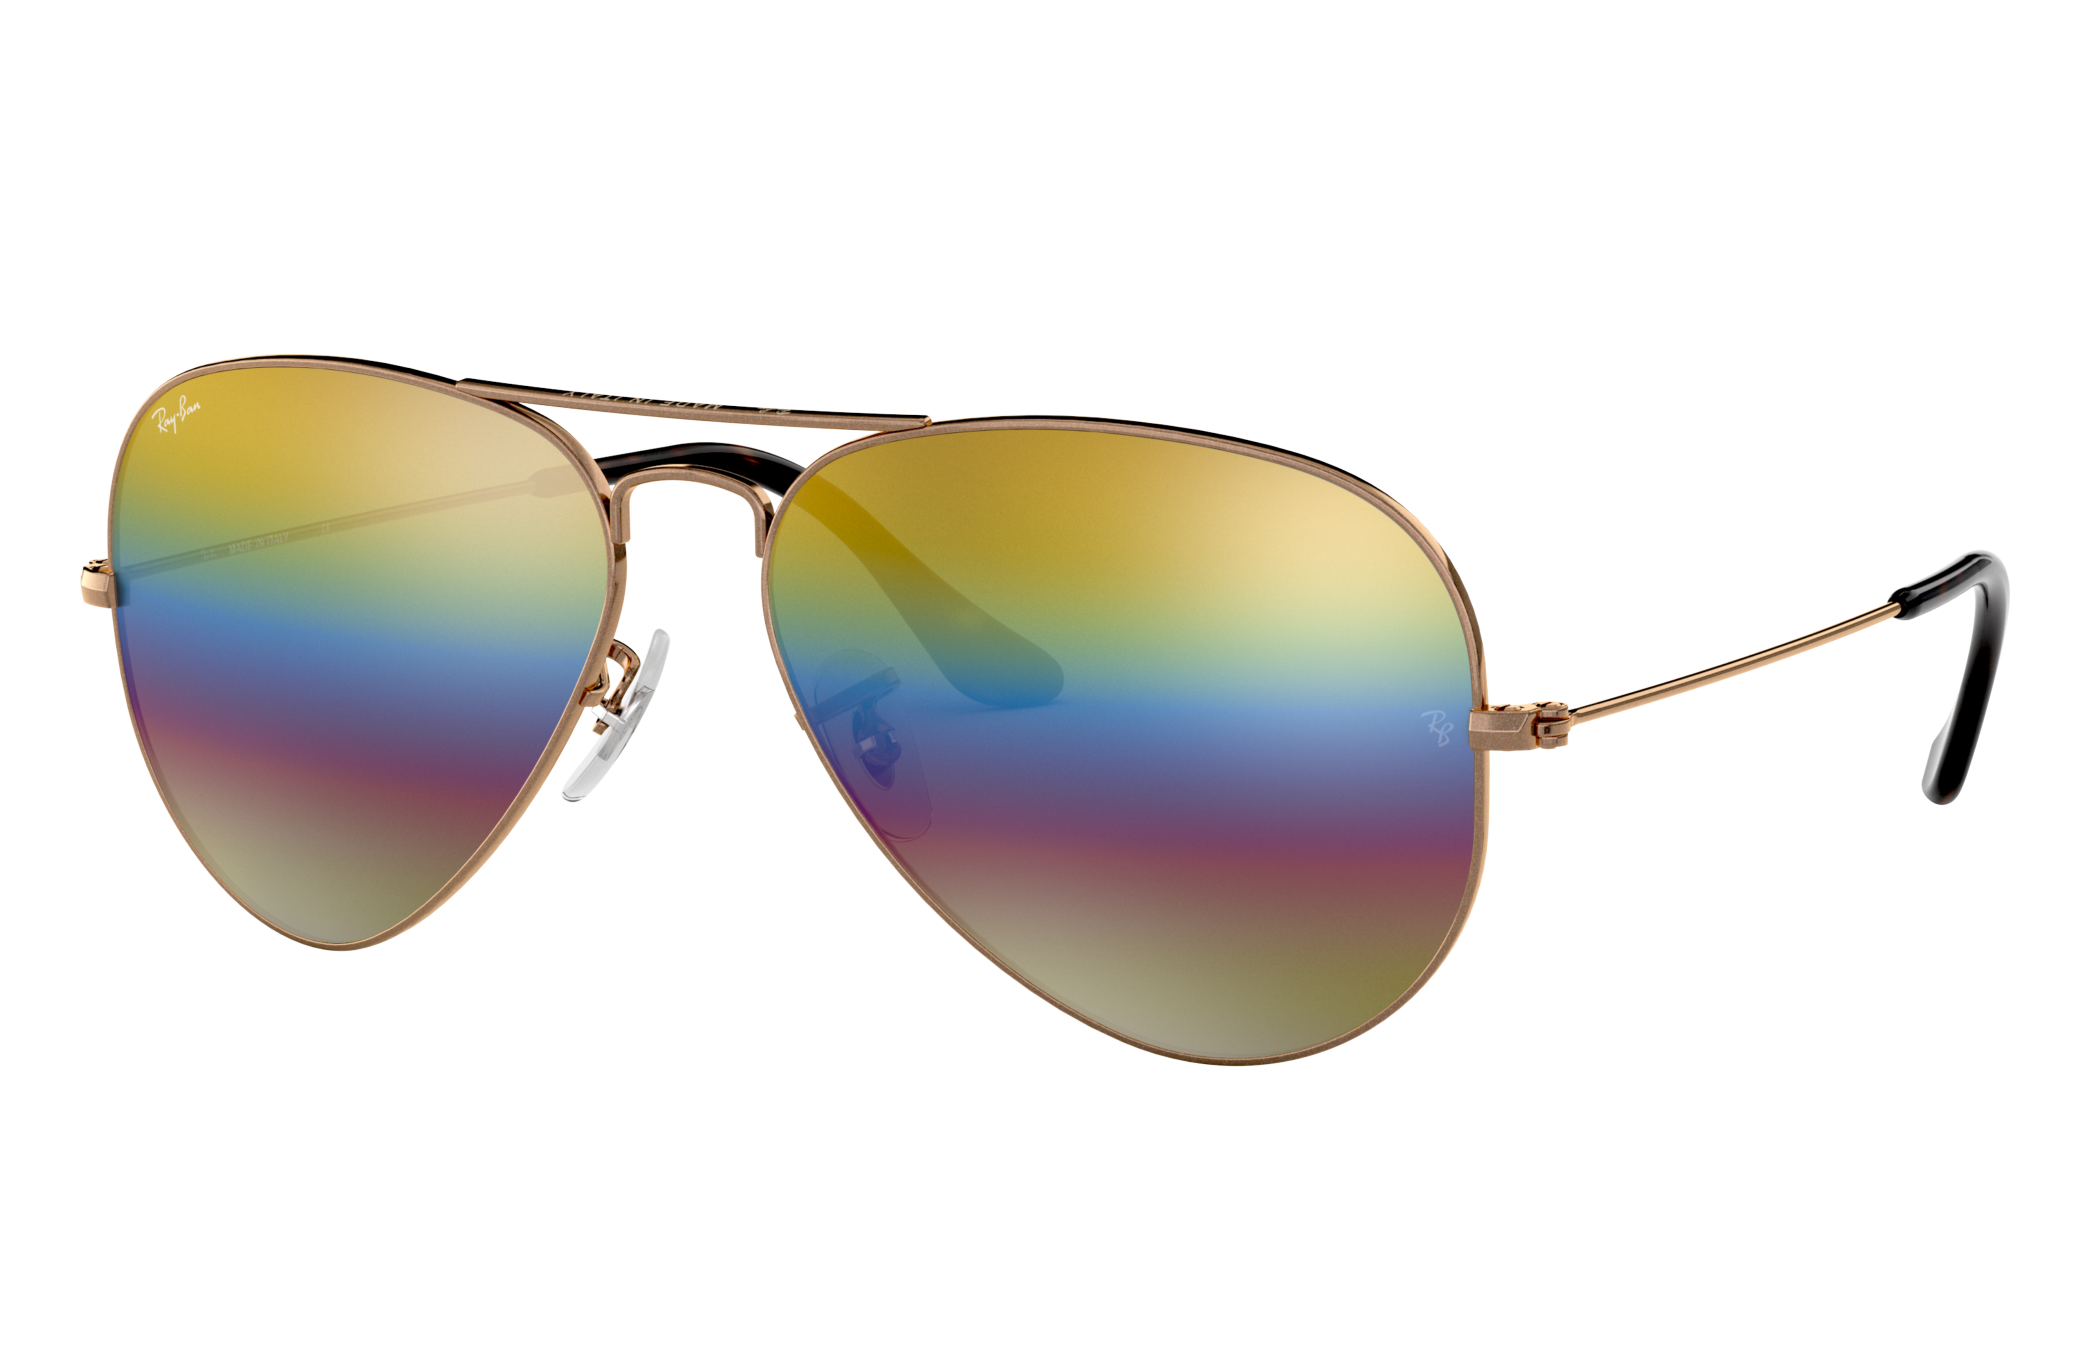 Aviator Lenses Sunglasses in Bronze and Gold Rainbow | Ray-Ban ®